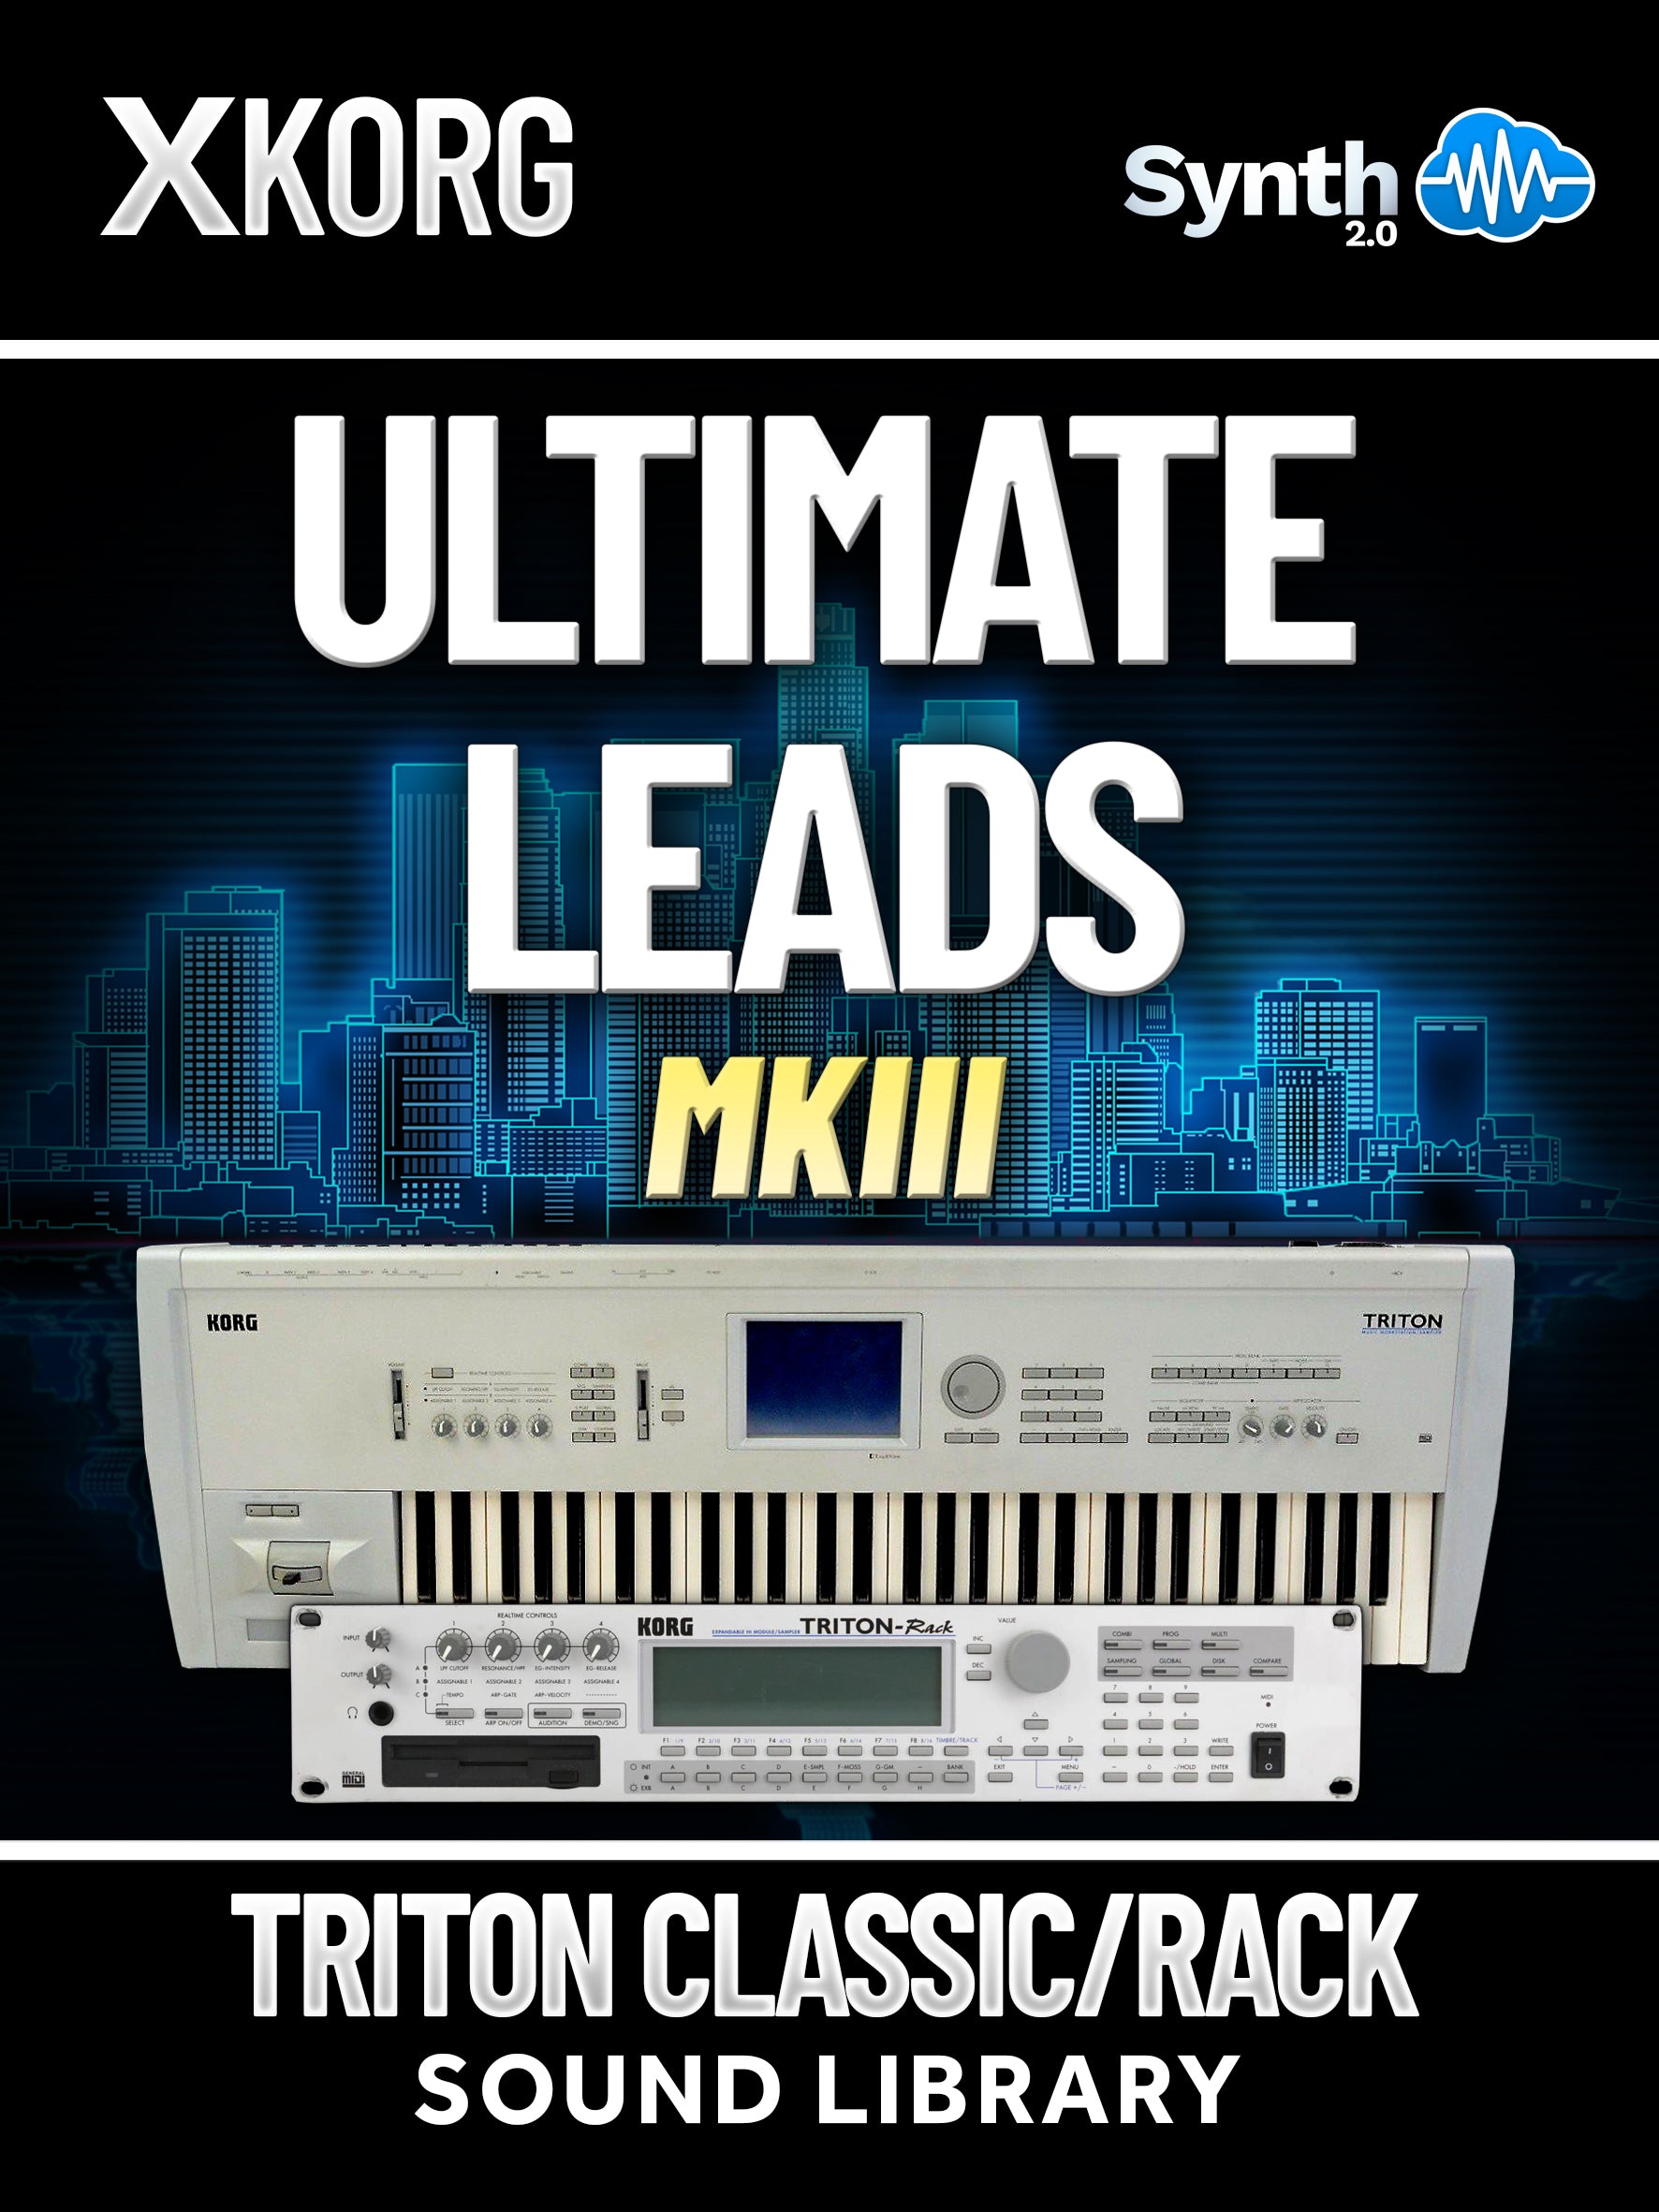 SSX102 - Ultimate Leads MKIII - Korg Triton CLASSIC / RACK ( 55 presets )